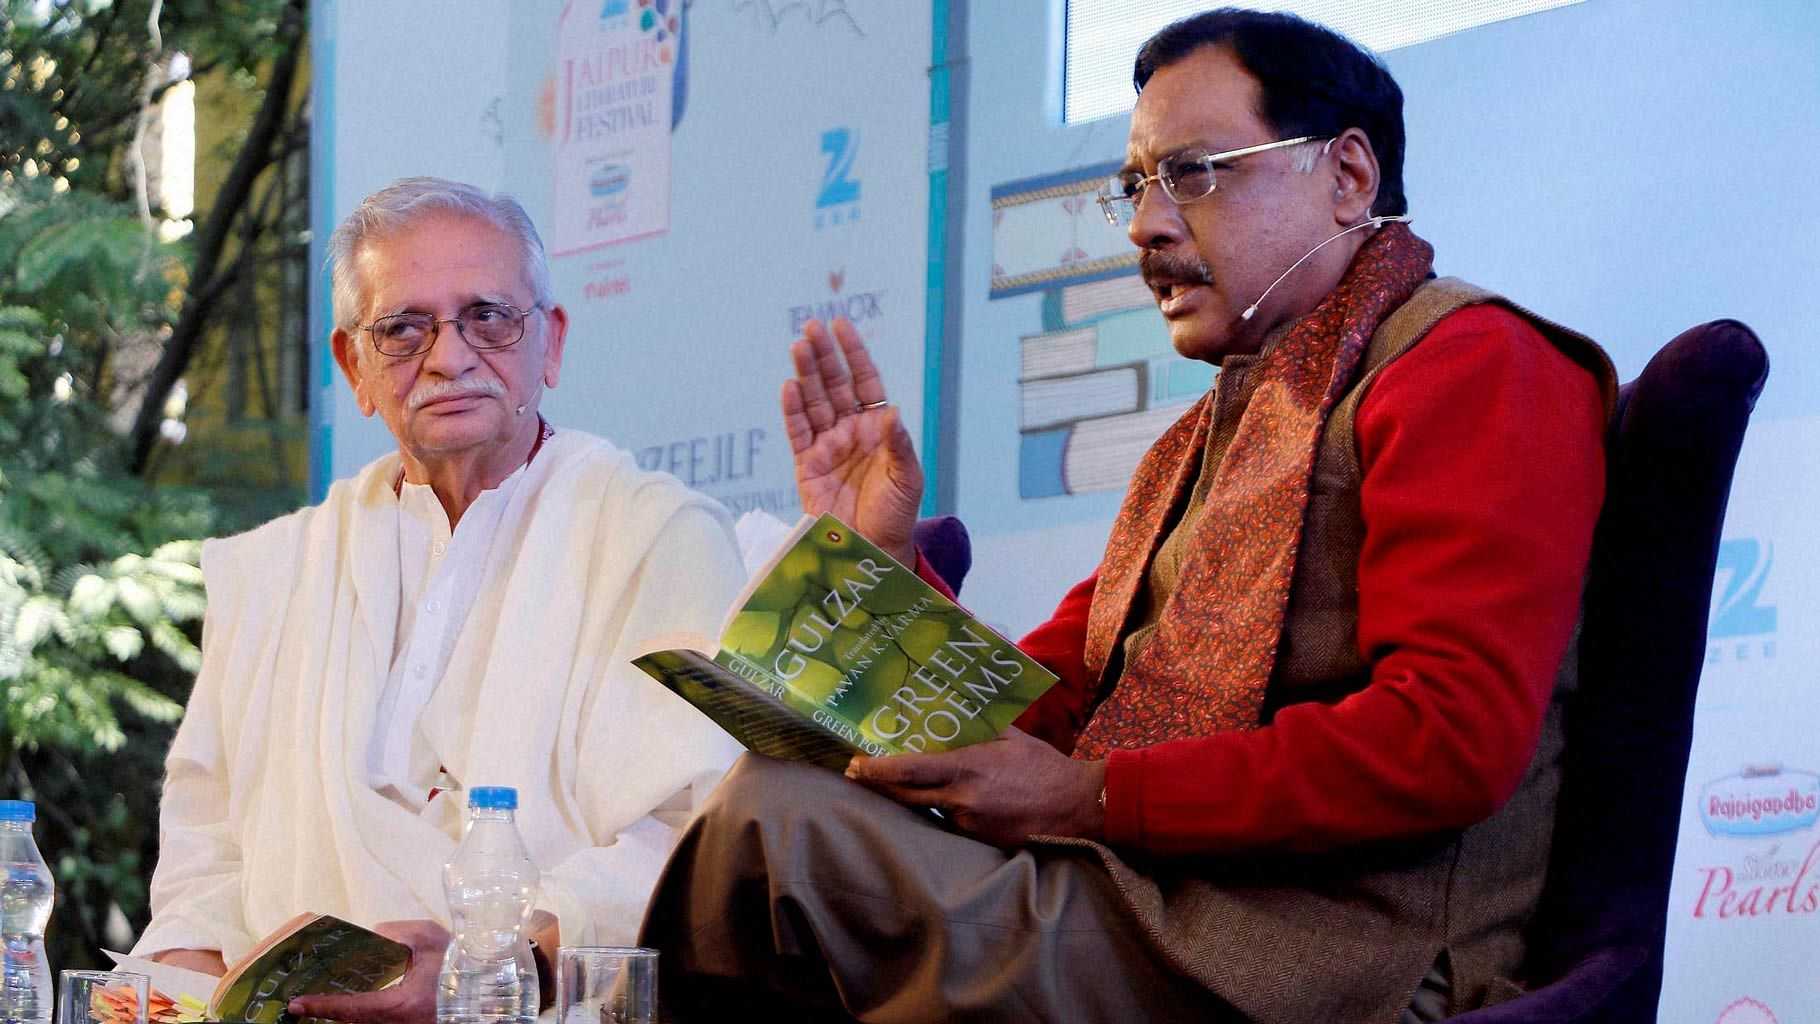 Lyricist and Poet Gulzar (left) with Writer and JD(U) leader Pavan K Verma during the Jaipur Literature Festival at Diggi Palace in Jaipur on Sunday. (Photo: PTI)